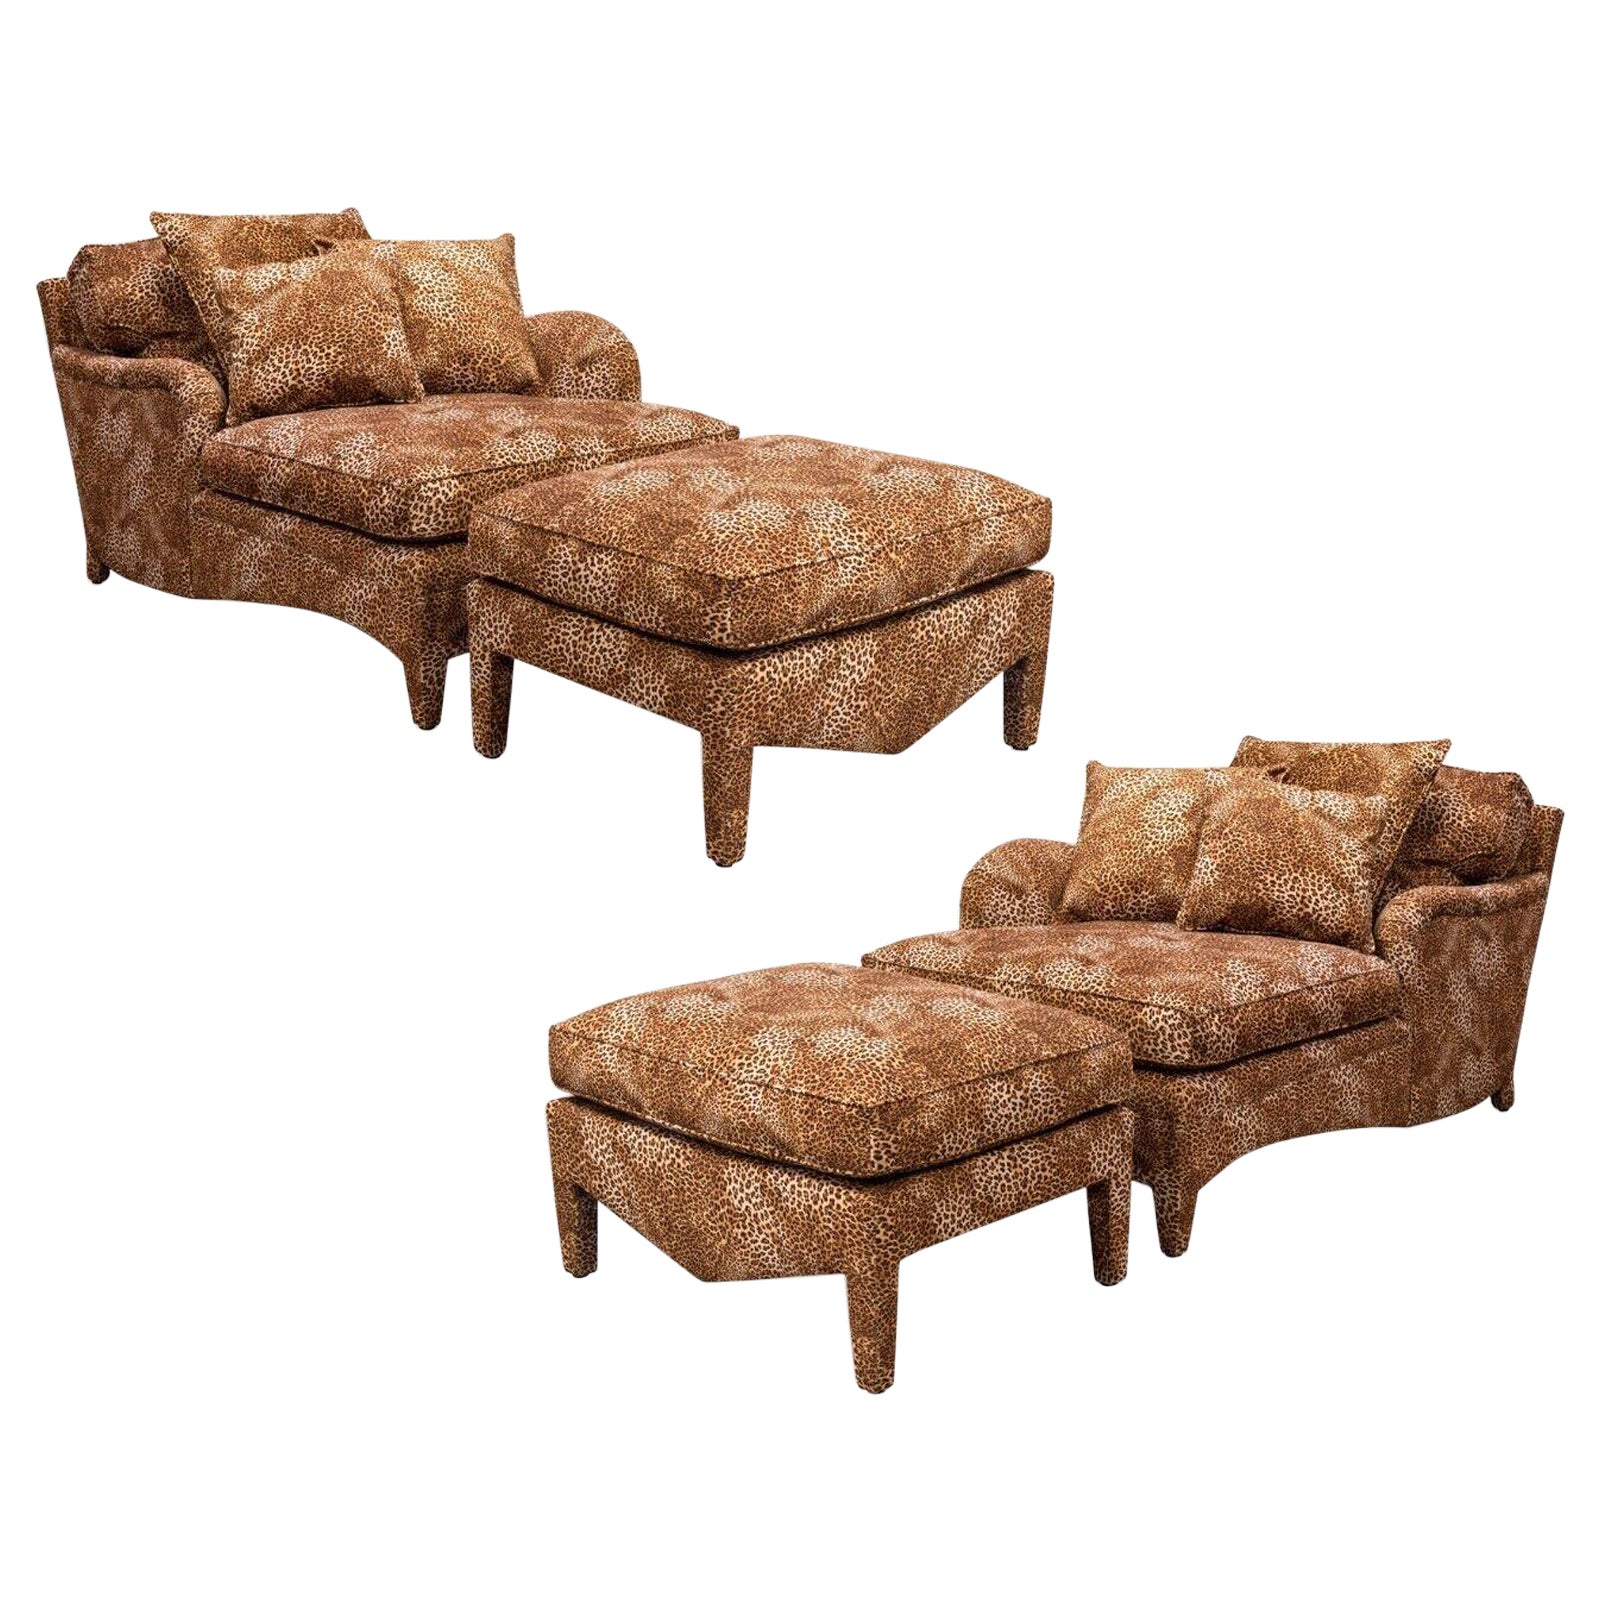 Pair of Donghia Leopard Print Left and Right Hand Chaise with Matching Ottomans